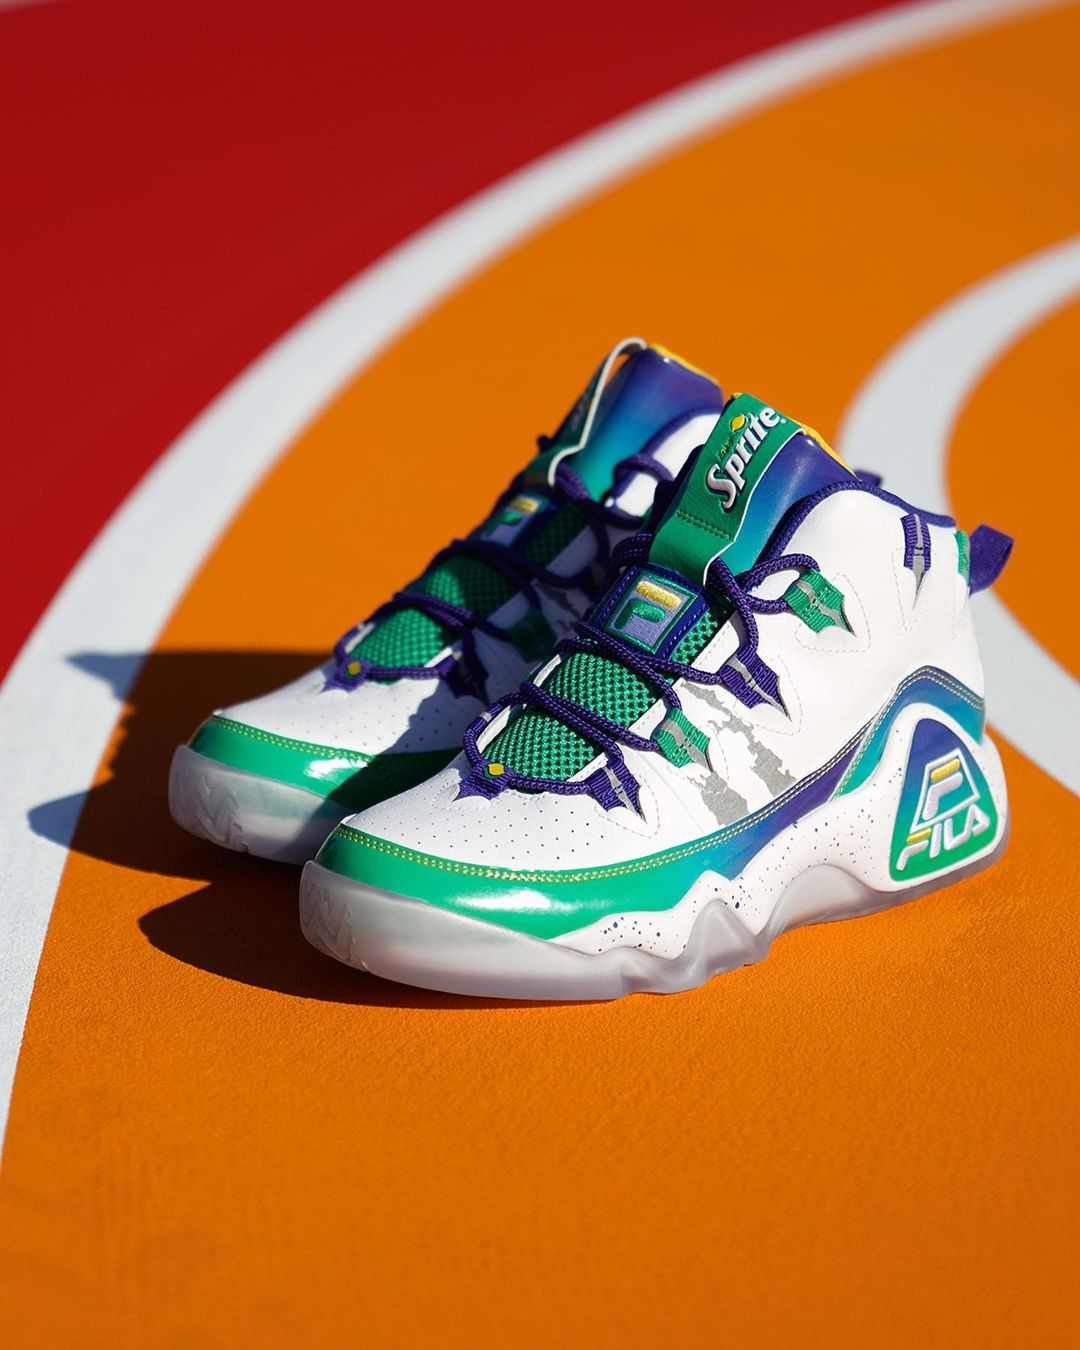 Now Available: Sprite x Fila Grant Hill 1 